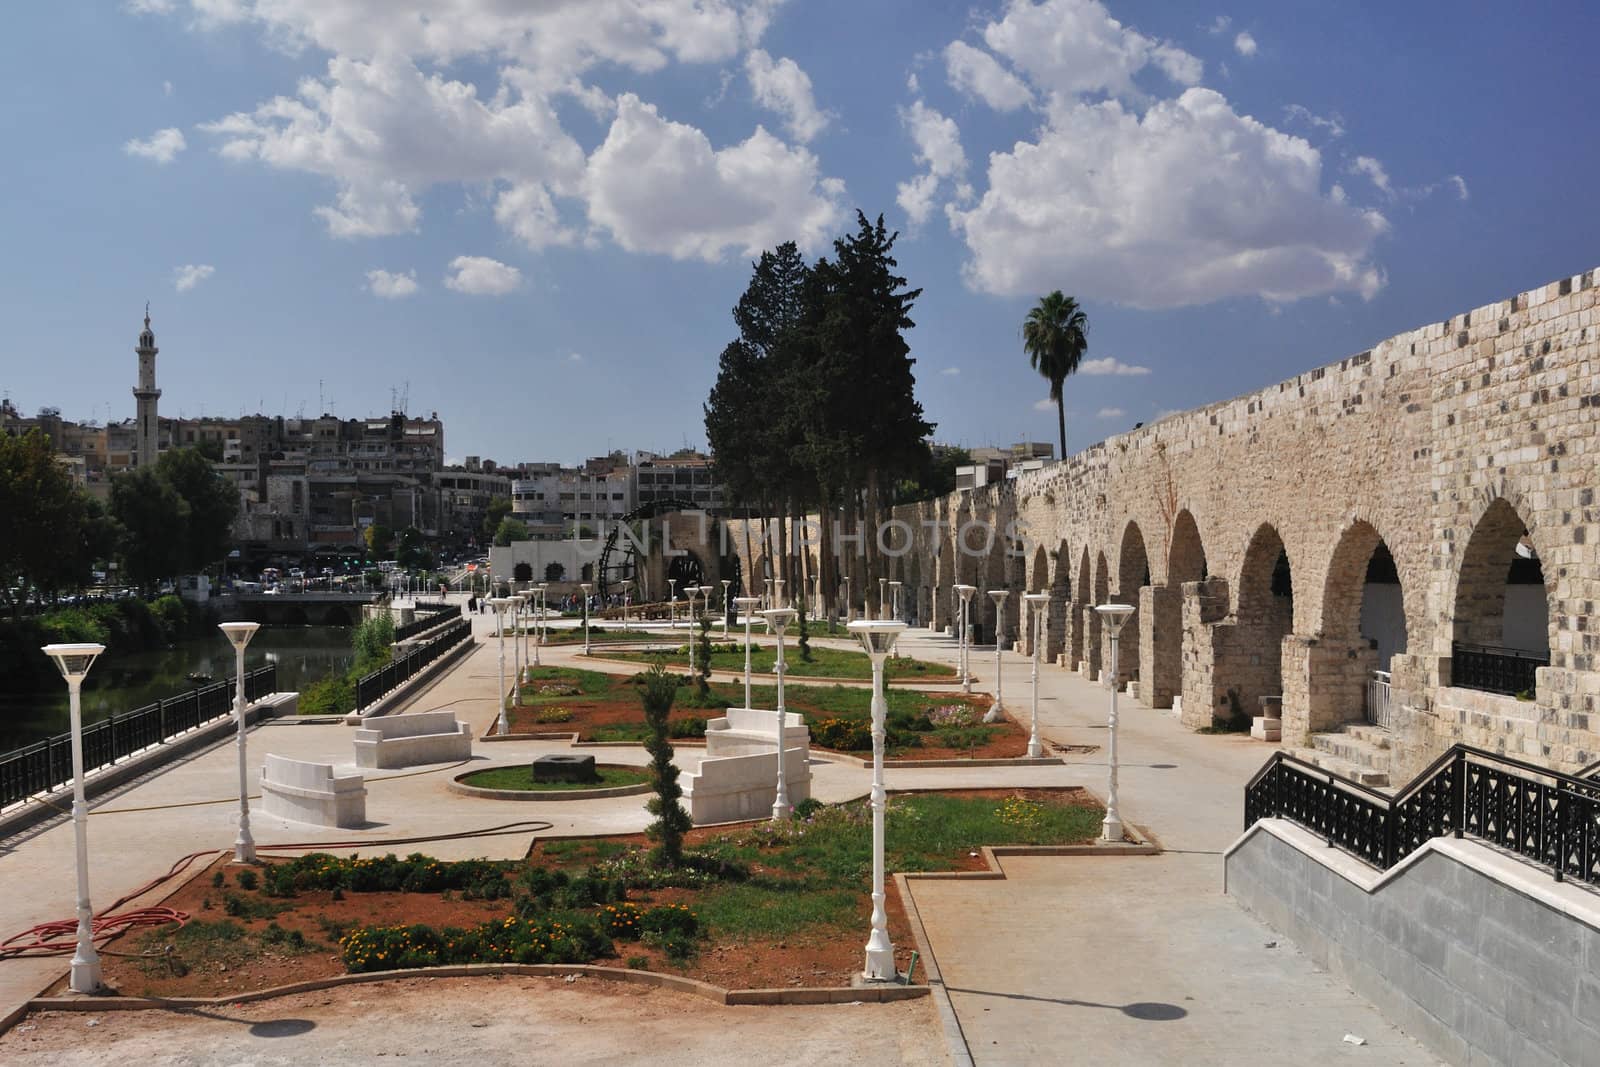 This is small garden round aqueduct in Hama, in Syria.